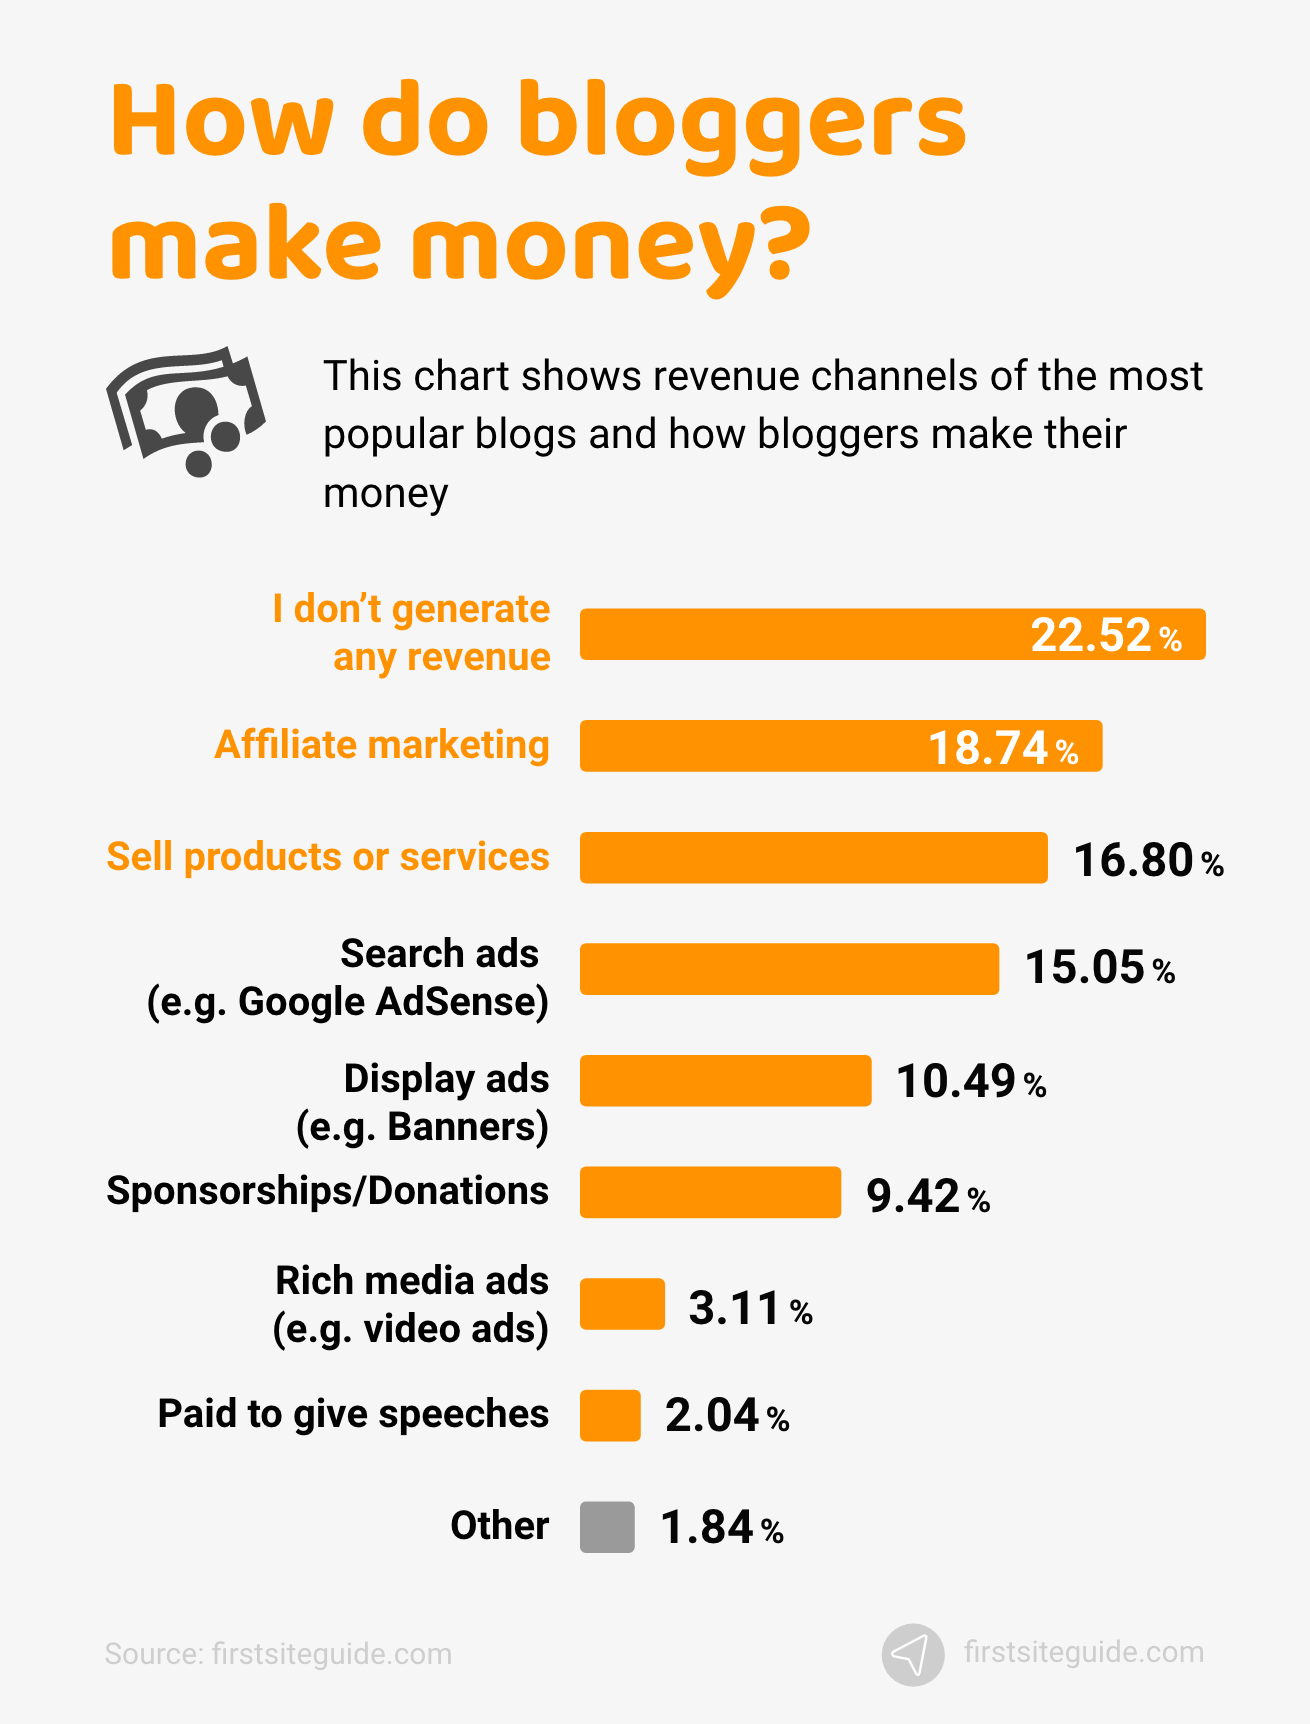 How do you make money from your blog